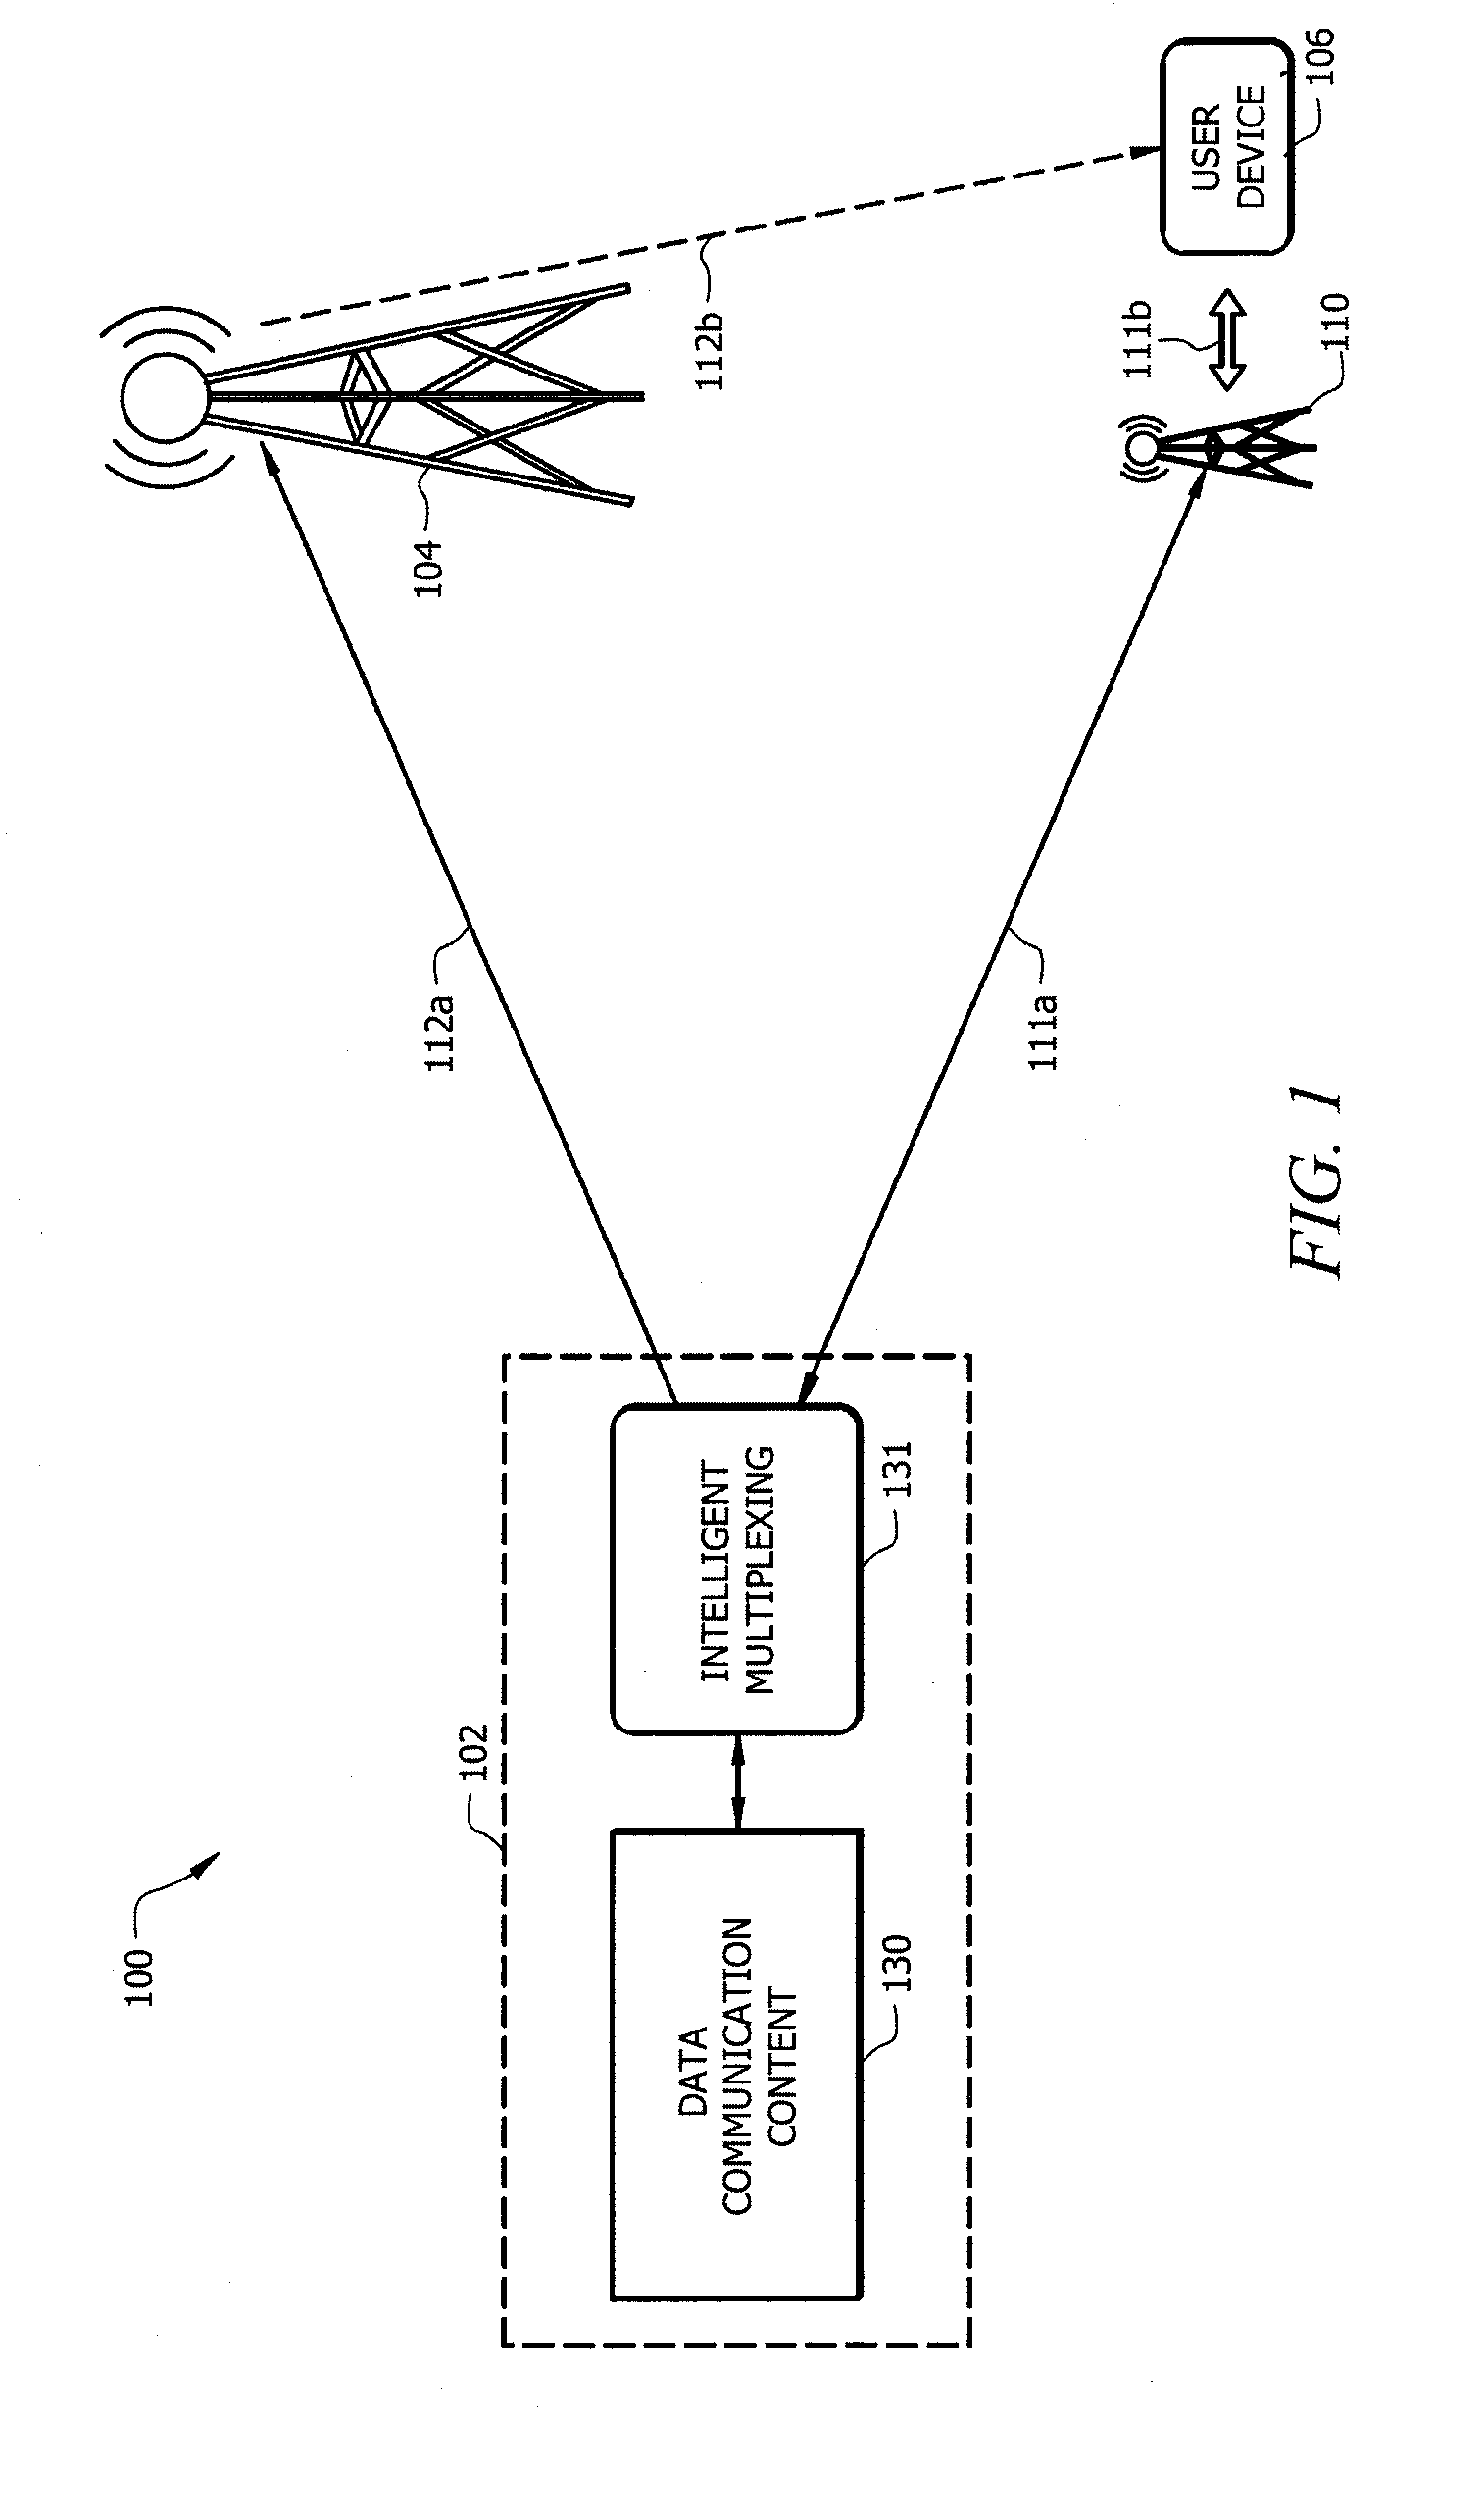 Distributed storage and sharing of data packets in hybrid networks